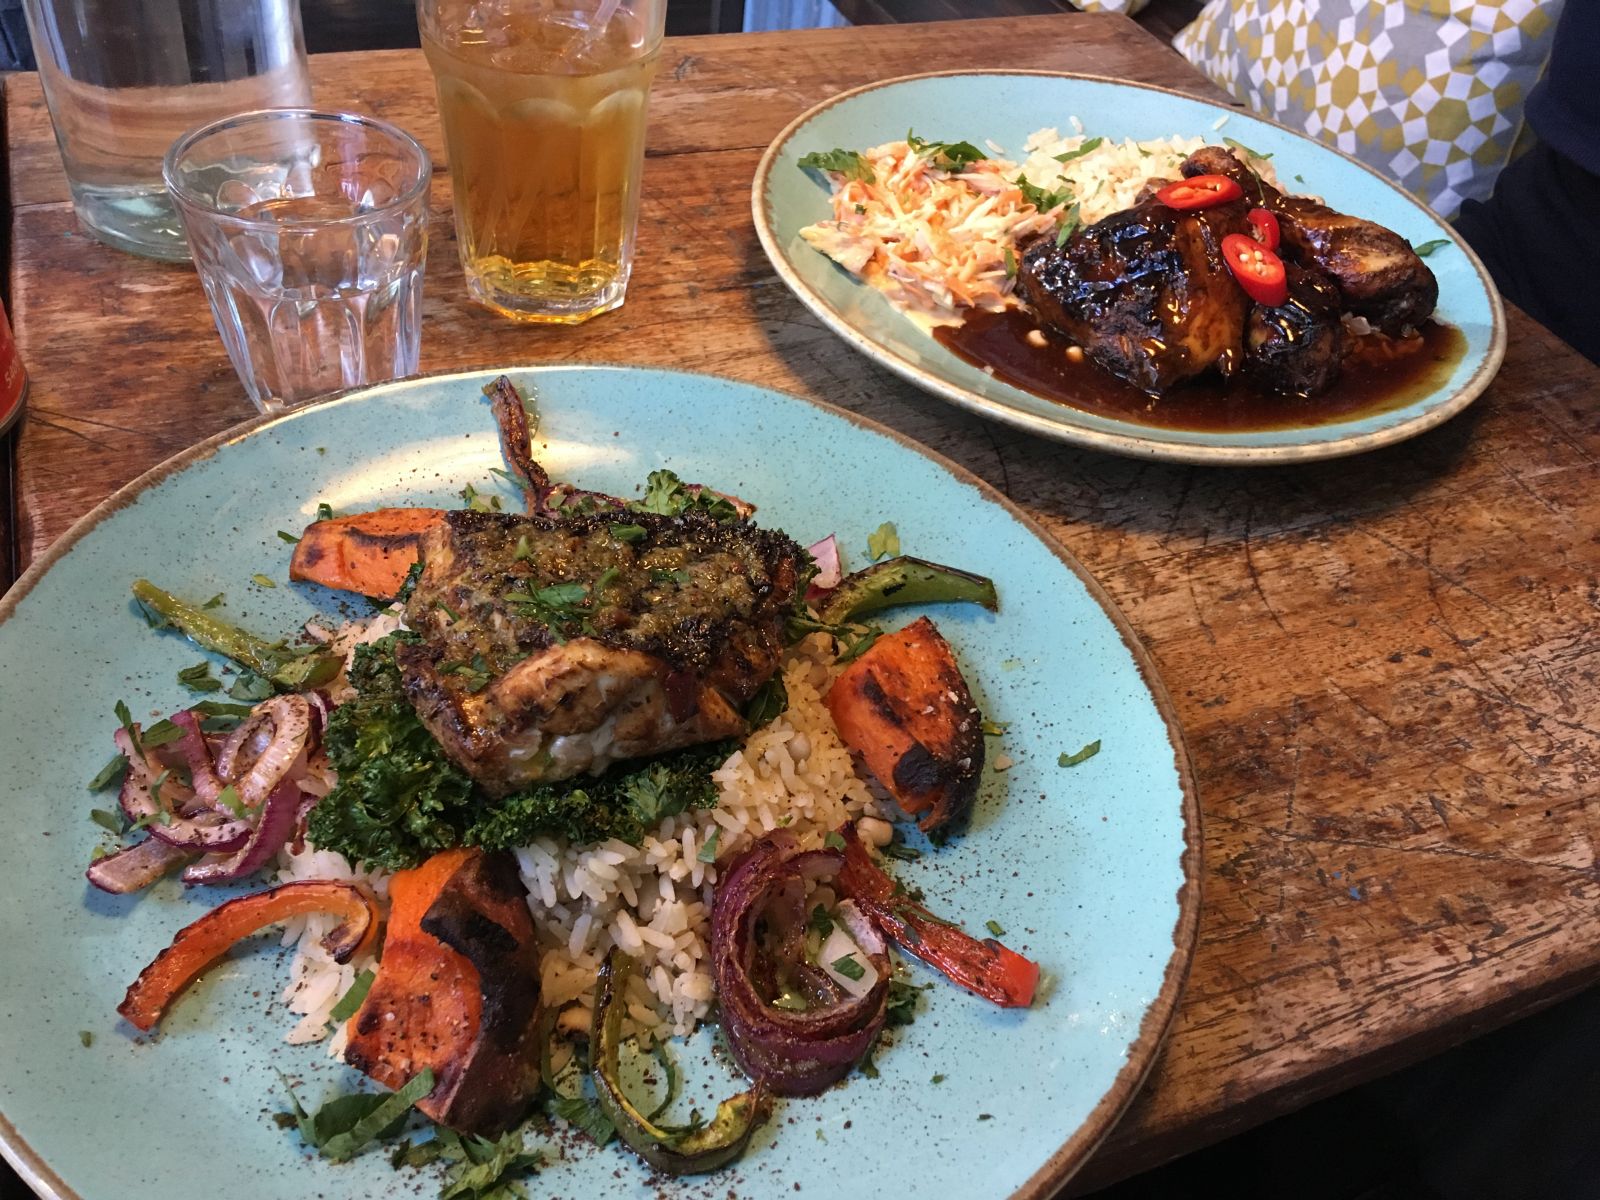 Calypso Kitchen mains: The Jerk Red Snapper and Jerk Chicken.